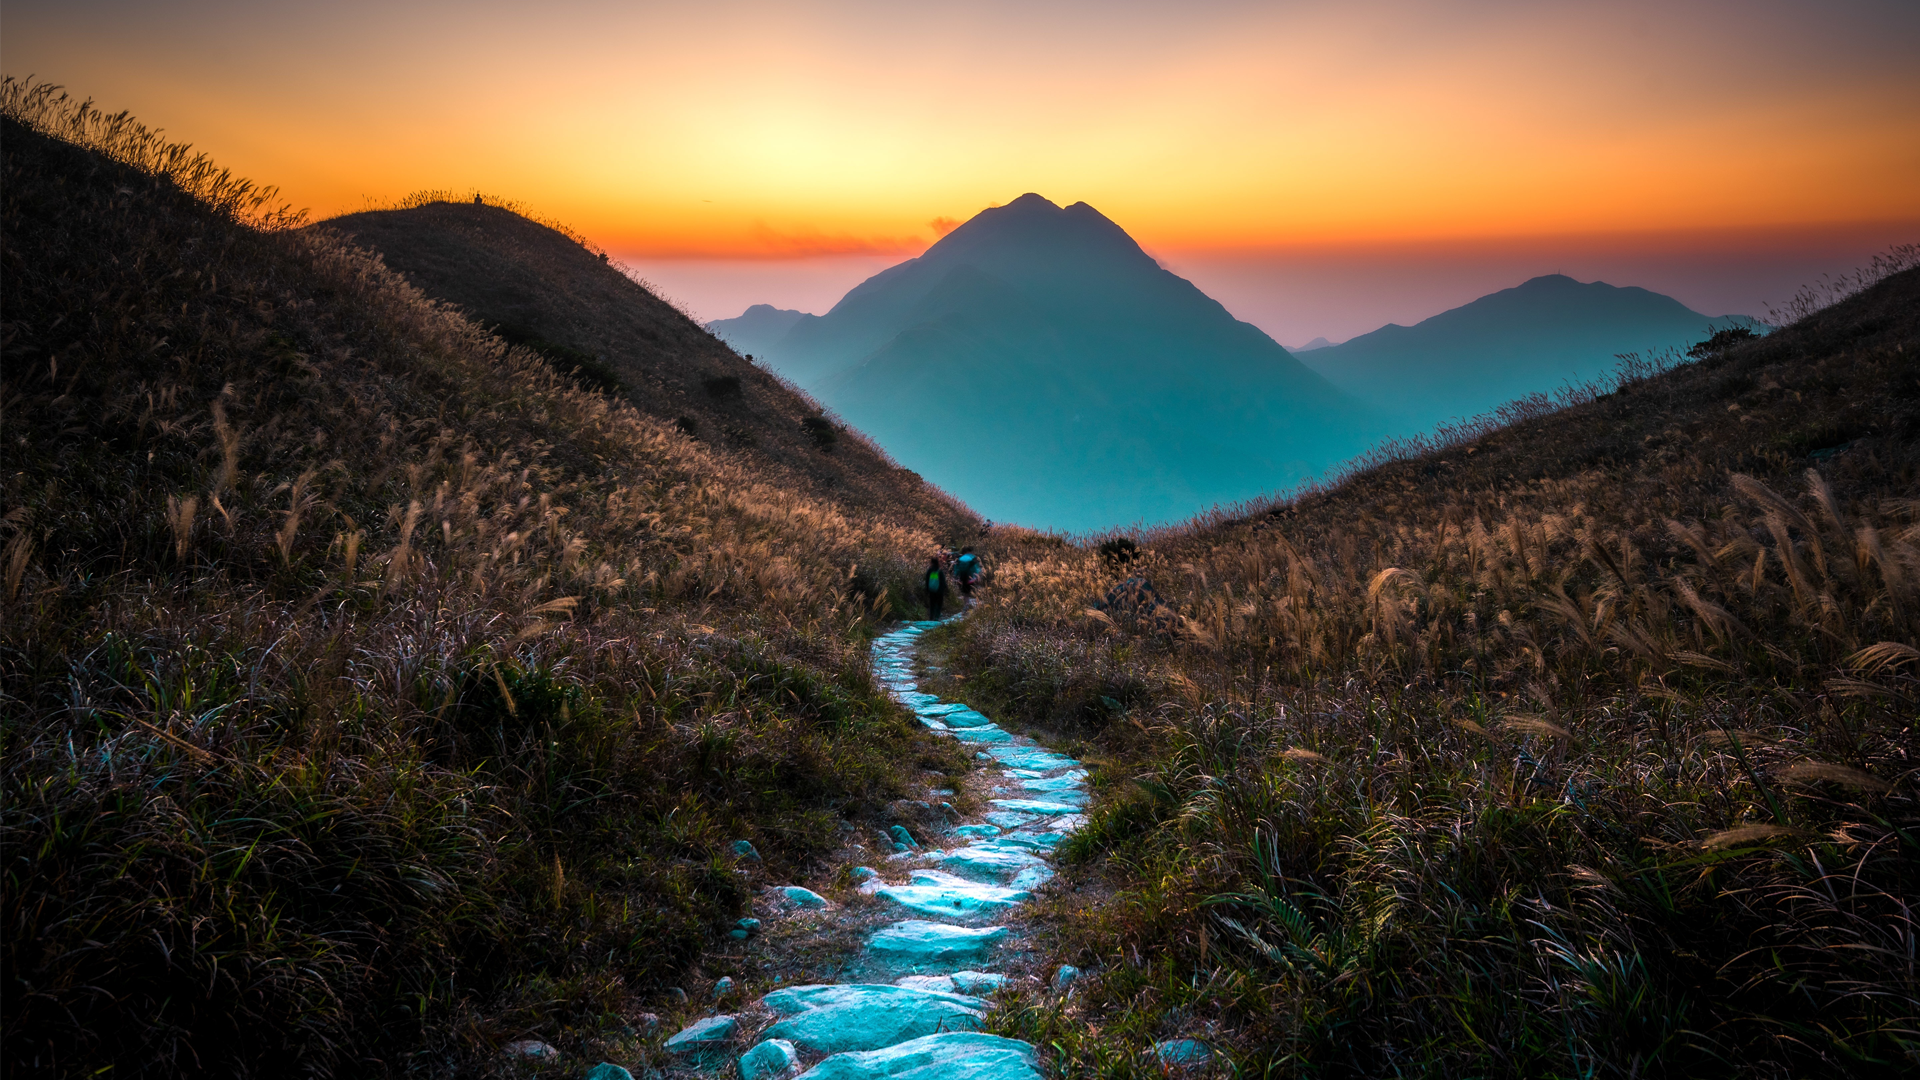 Trail leads into a valley at sunset